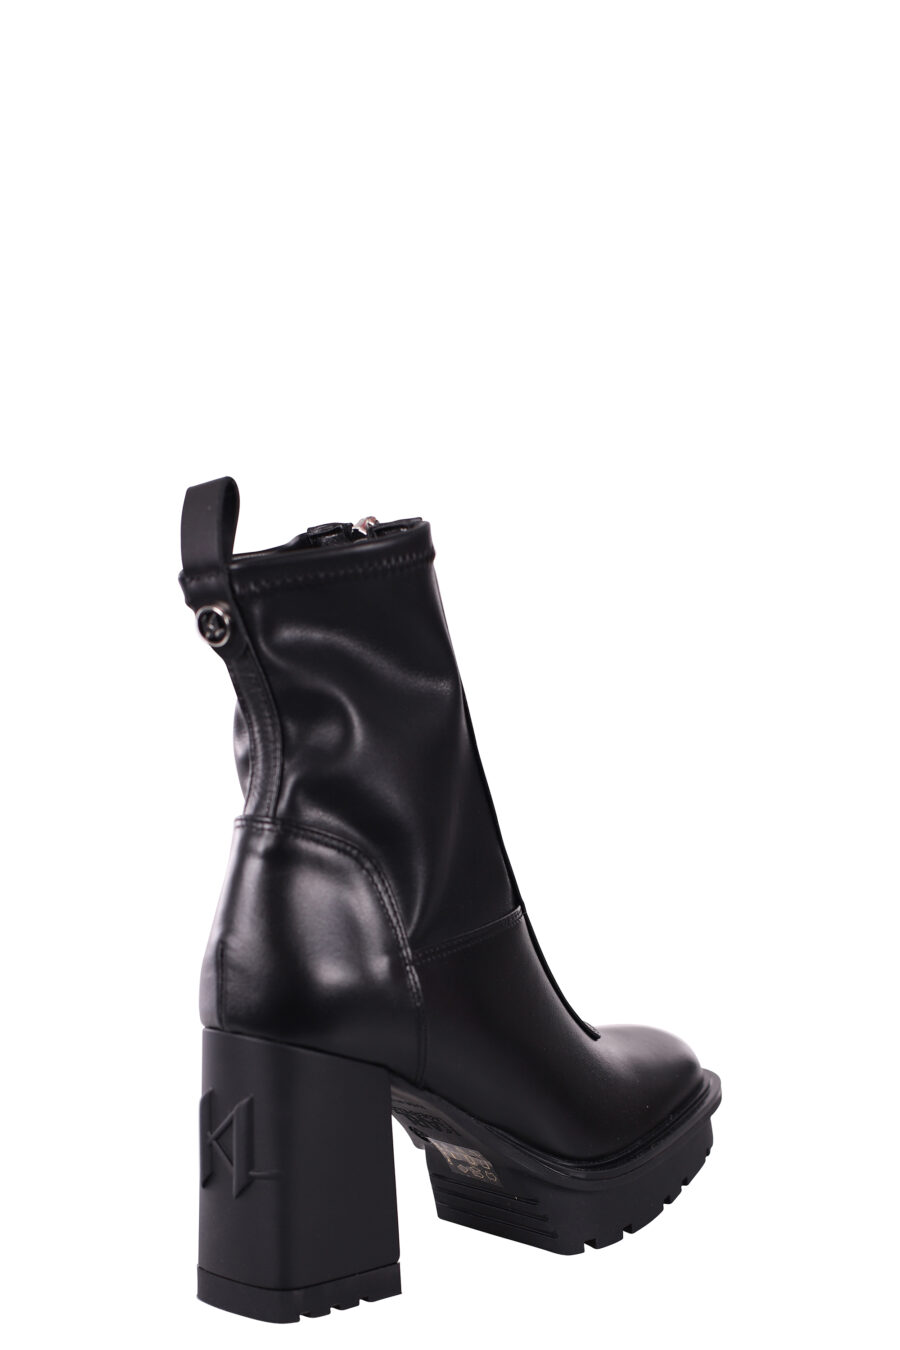 Black sock ankle boots with heel and platform - IMG 5811